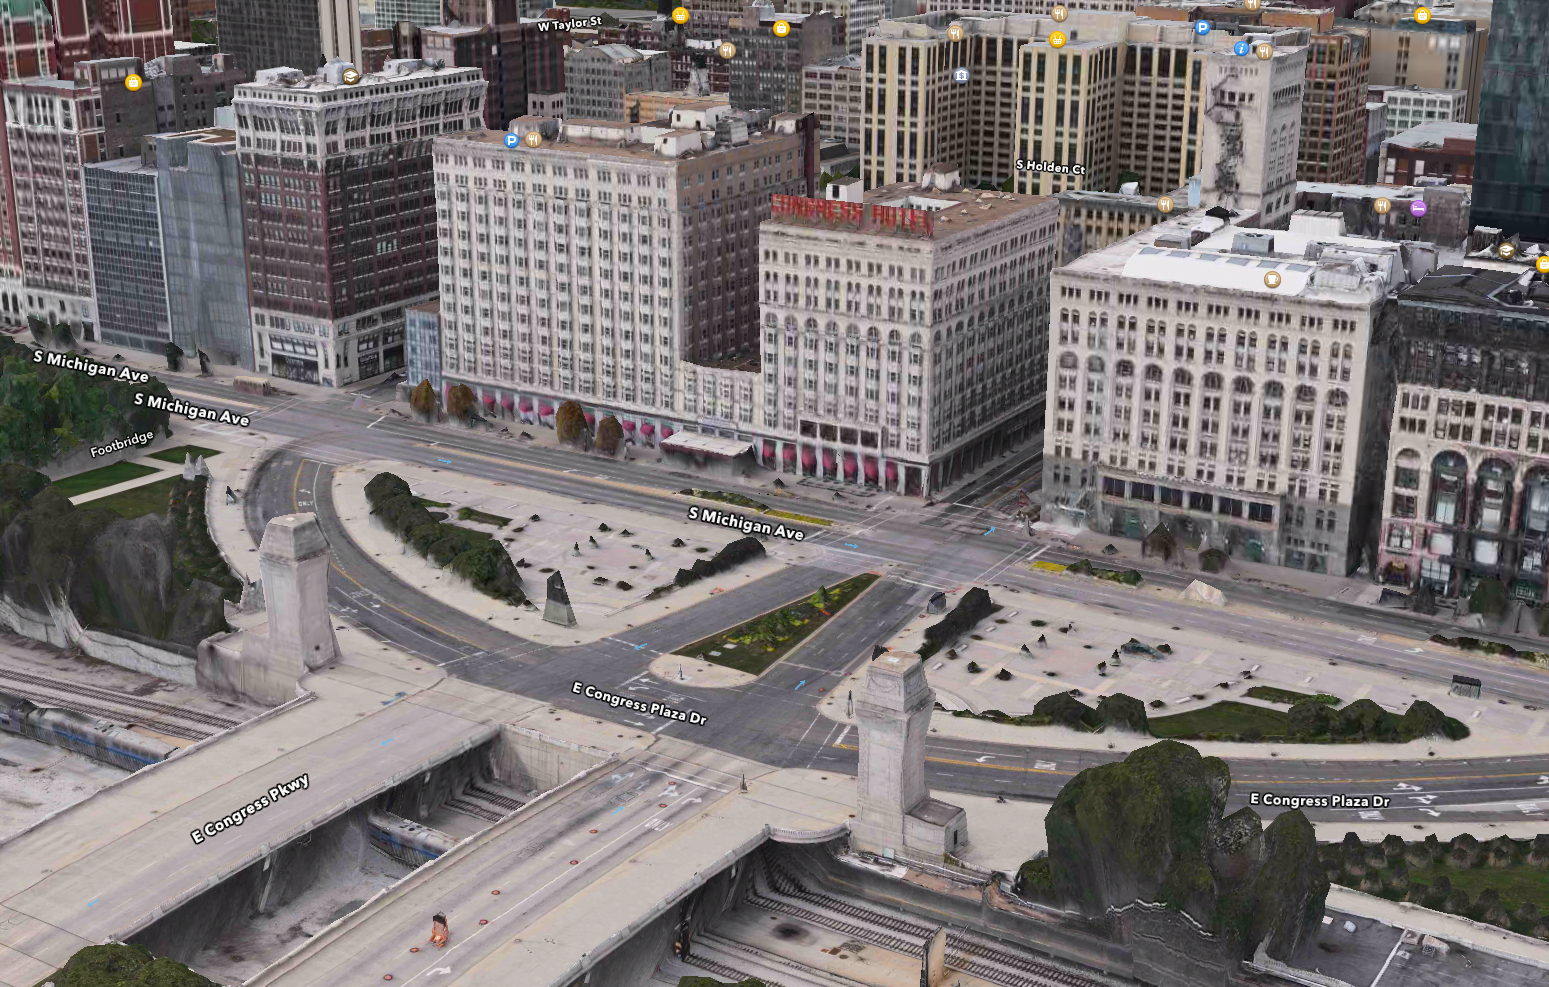 A 3D view of the Congress Hotel on Michigan Ave. in Chicago as seen in Apple's new Maps Desktop App.